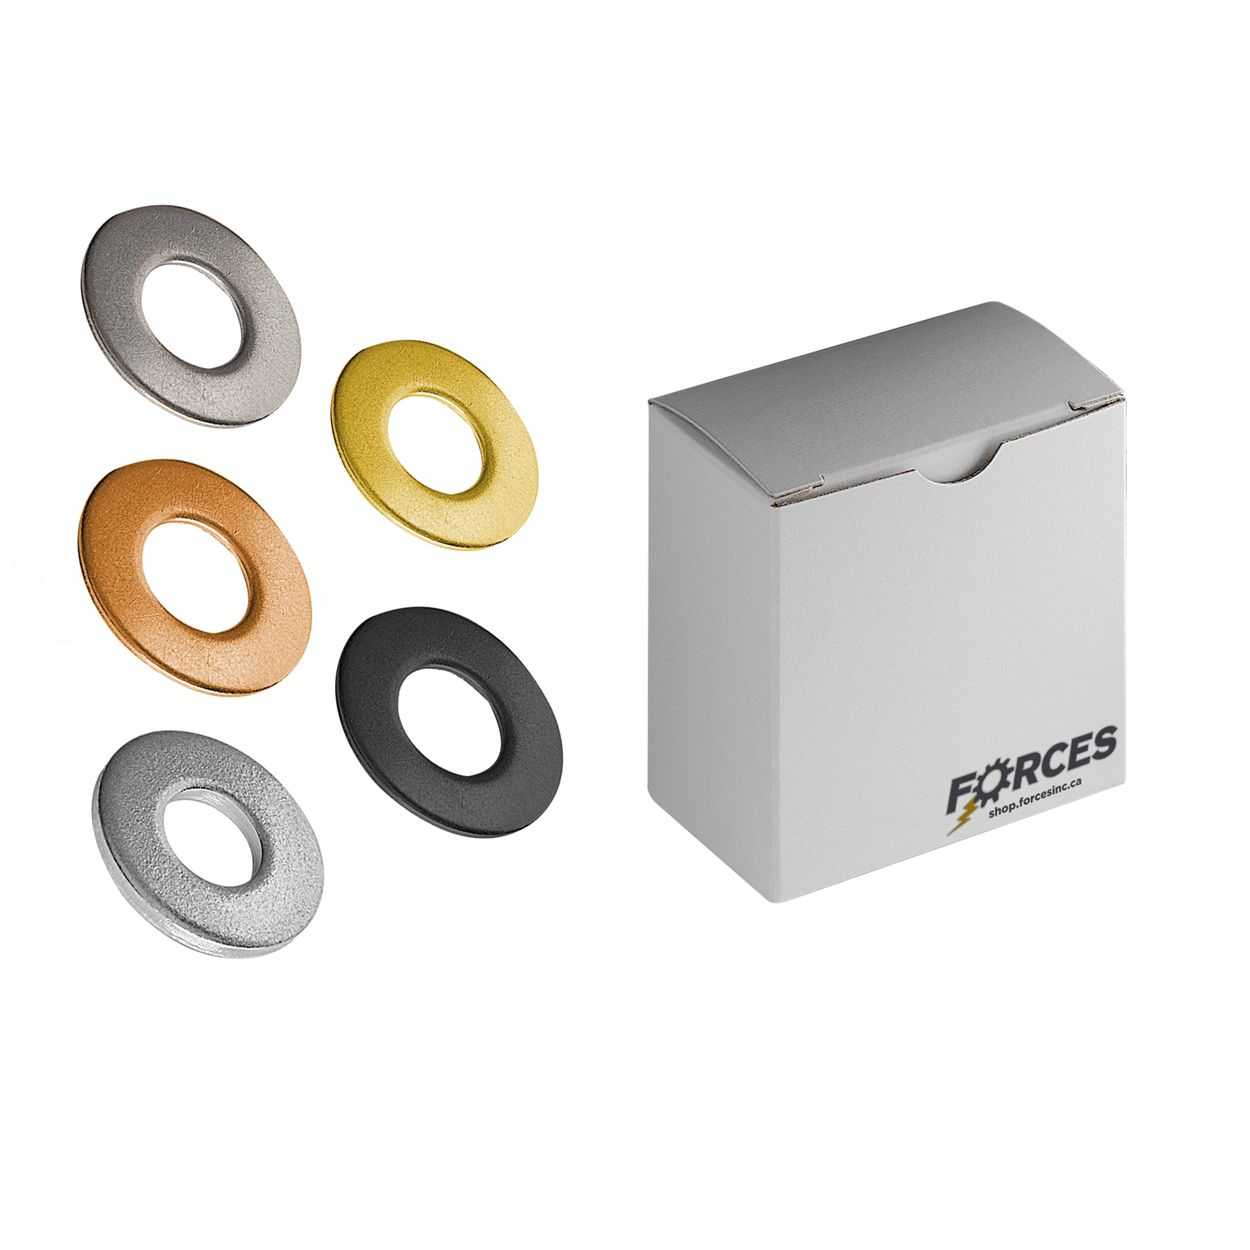 Standard Flat Washers - Forces Inc